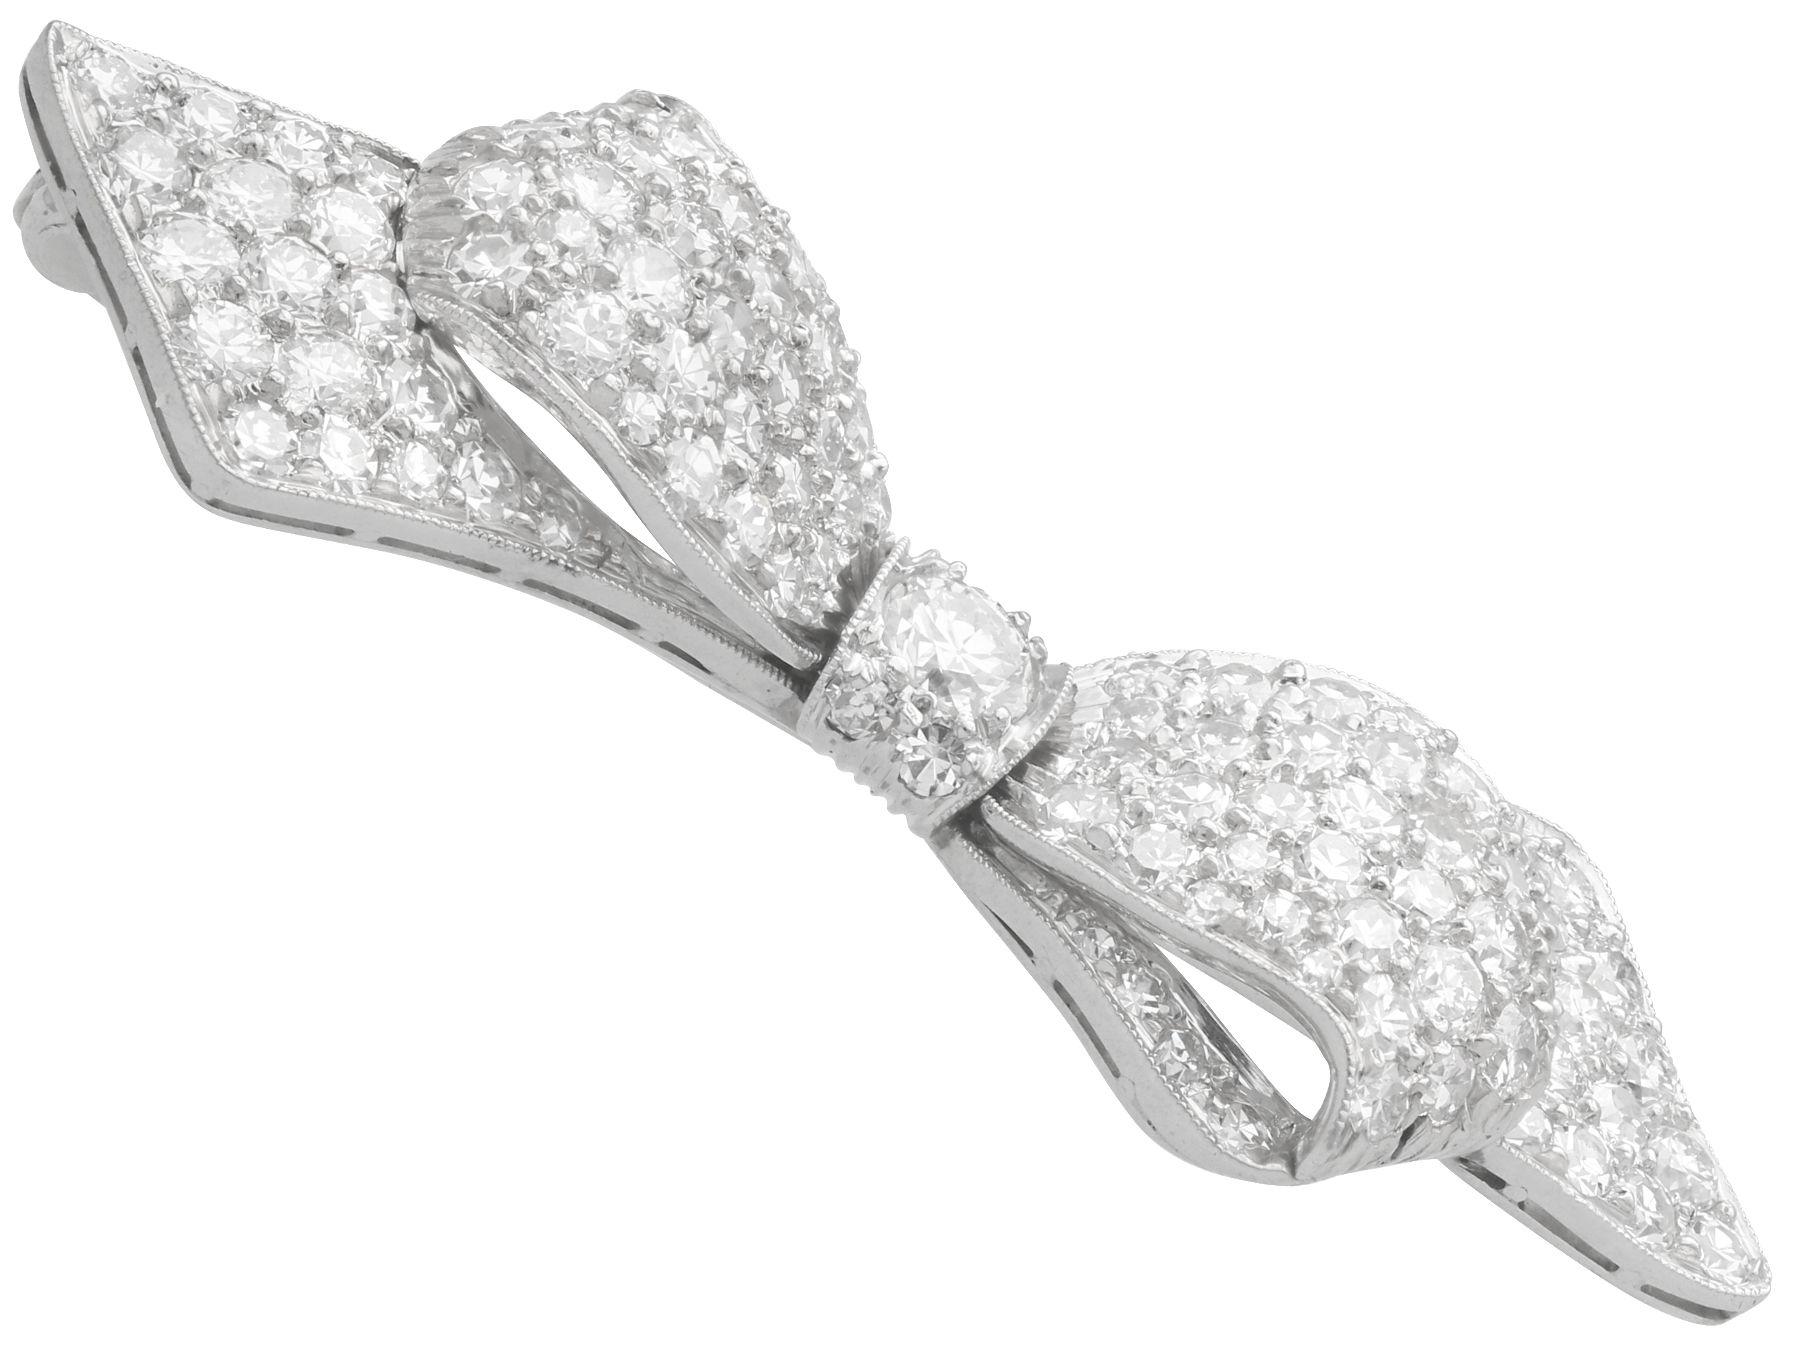 A stunning, fine and impressive 1.99 carat diamond and platinum bow brooch; part of our antique jewelry and estate jewelry collections

This stunning, fine and impressive antique diamond brooch has been crafted in platinum.

The brooch has been